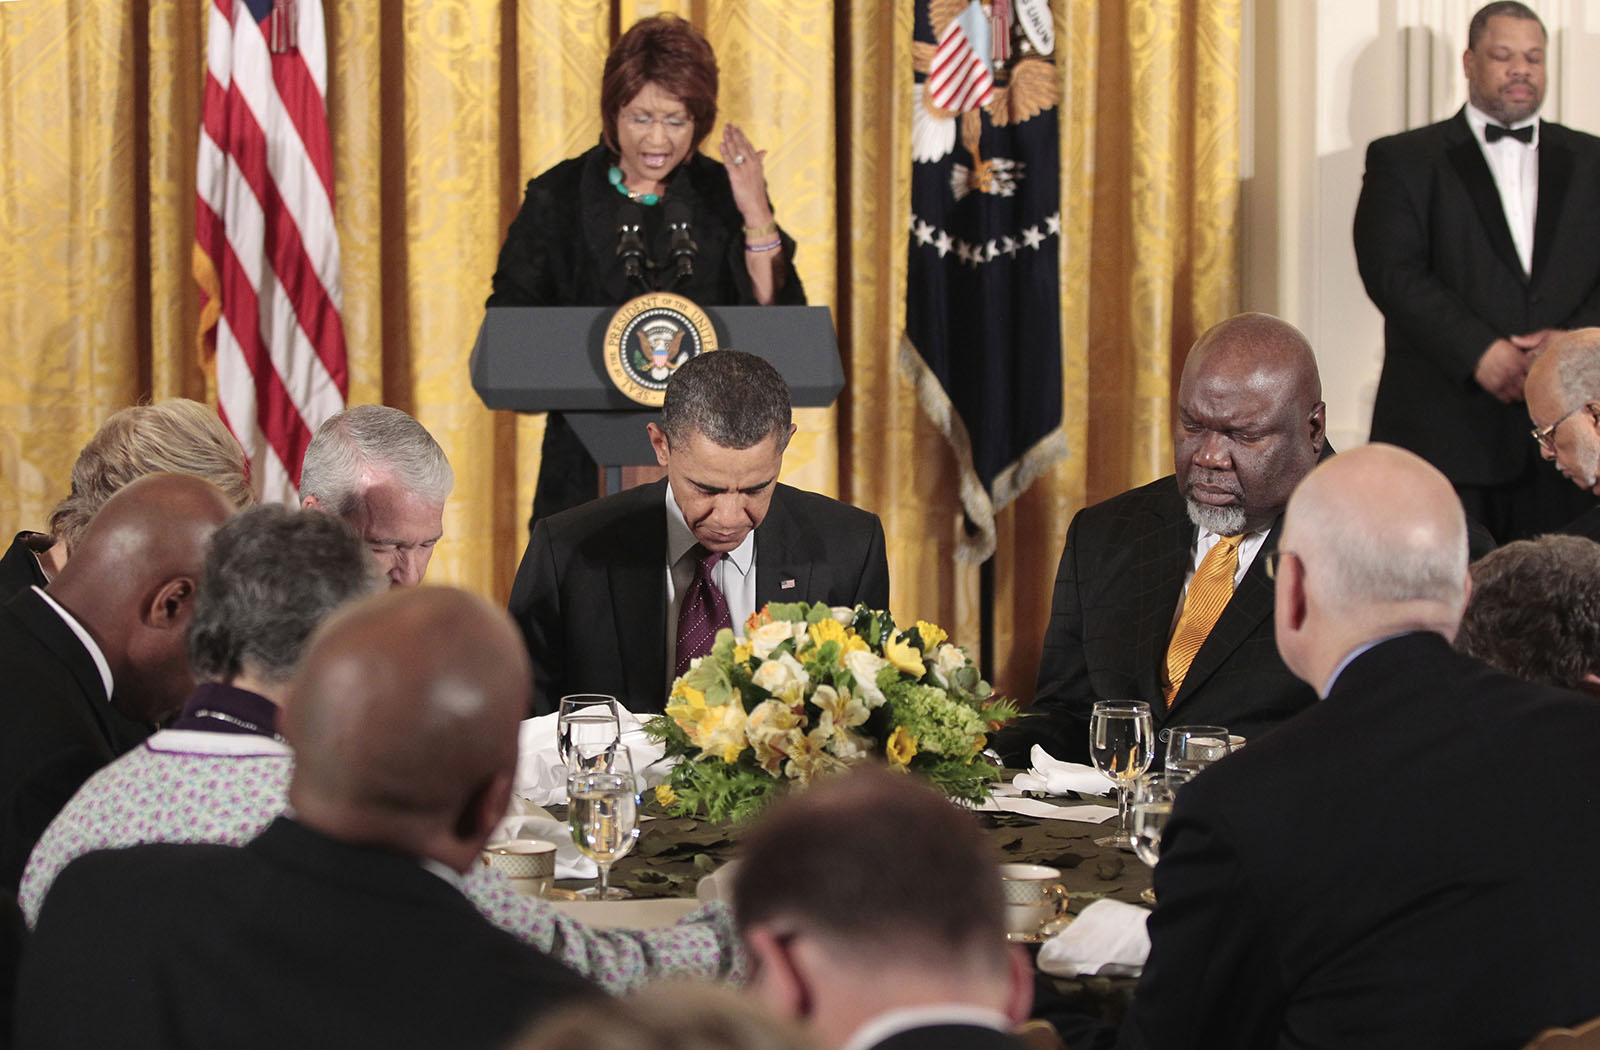 President Barack Obama, center seated, and others, lower their heads during a Easter Prayer breakfast with Christian leaders in the East Room of the White House, Tuesday, April 19, 2011. Leading the prayer behind Obama is Bishop Vashti Murphy McKenzie, of the African Methodist Episcopal Church, and seated to the right of Obama is Texas-based evangelist Bishop T.D. Jakes. (AP Photo/Pablo Martinez Monsivais)